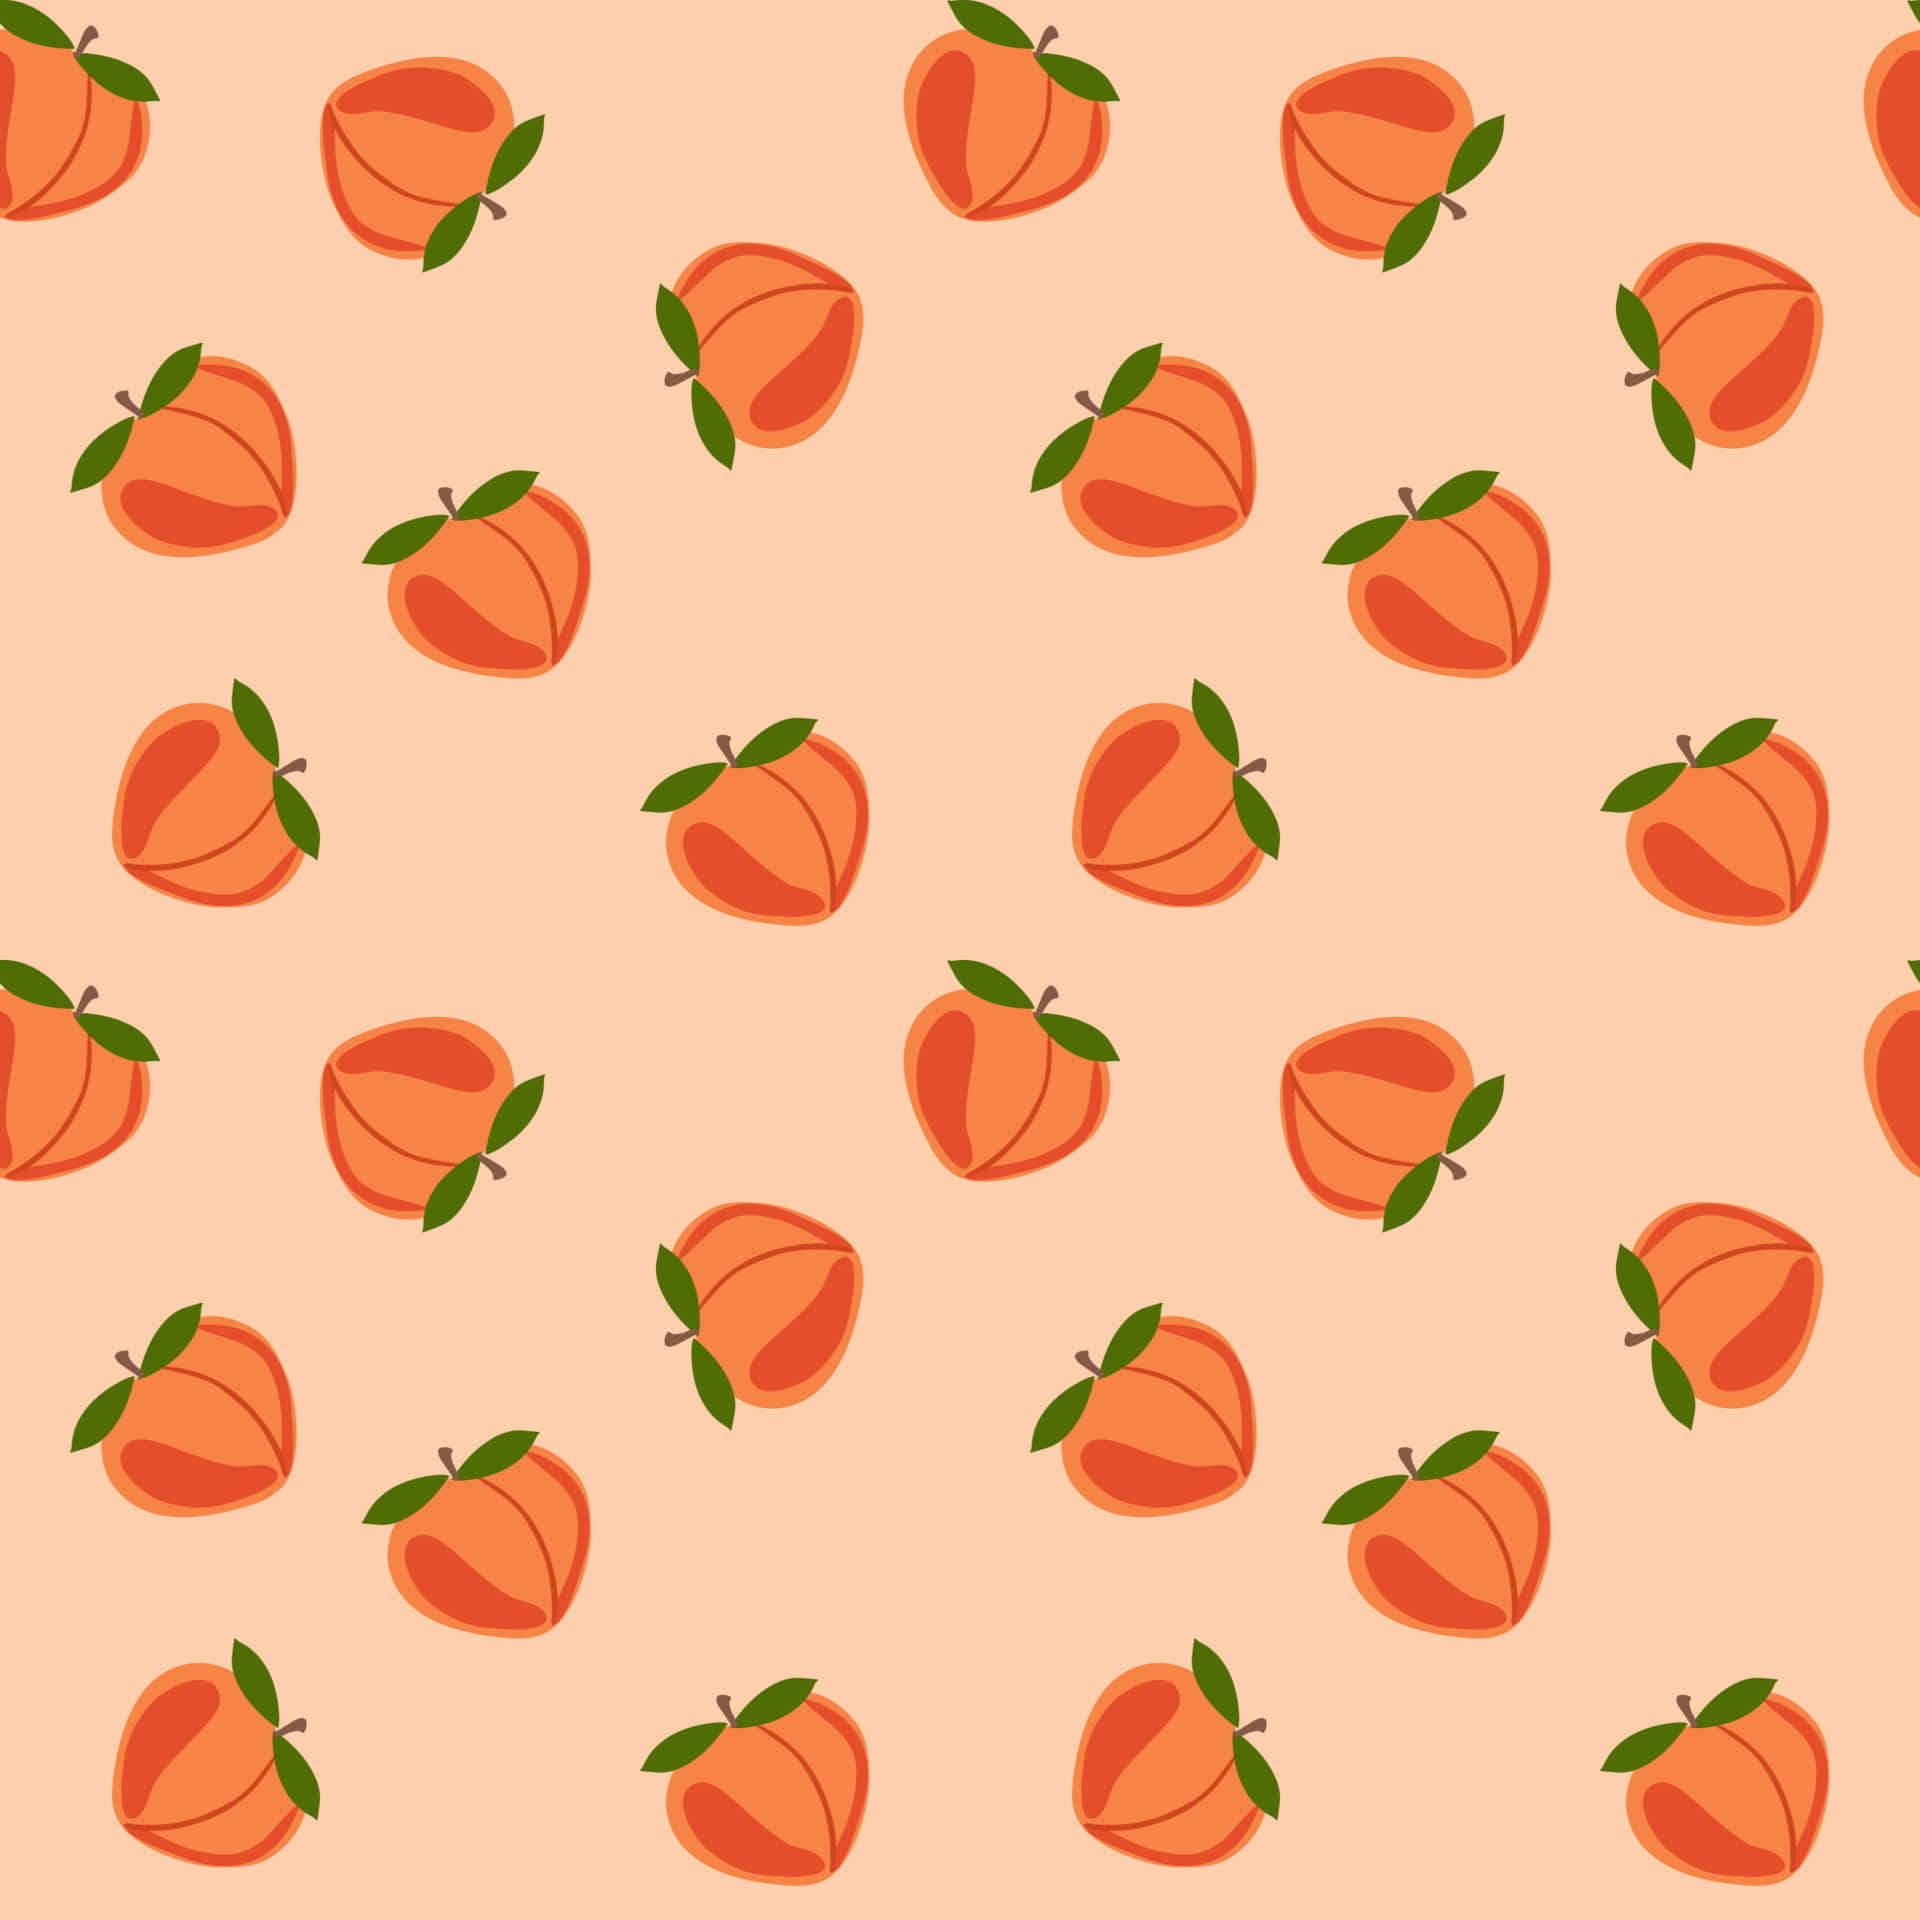 Adorable Orange Wallpaper for Your Device